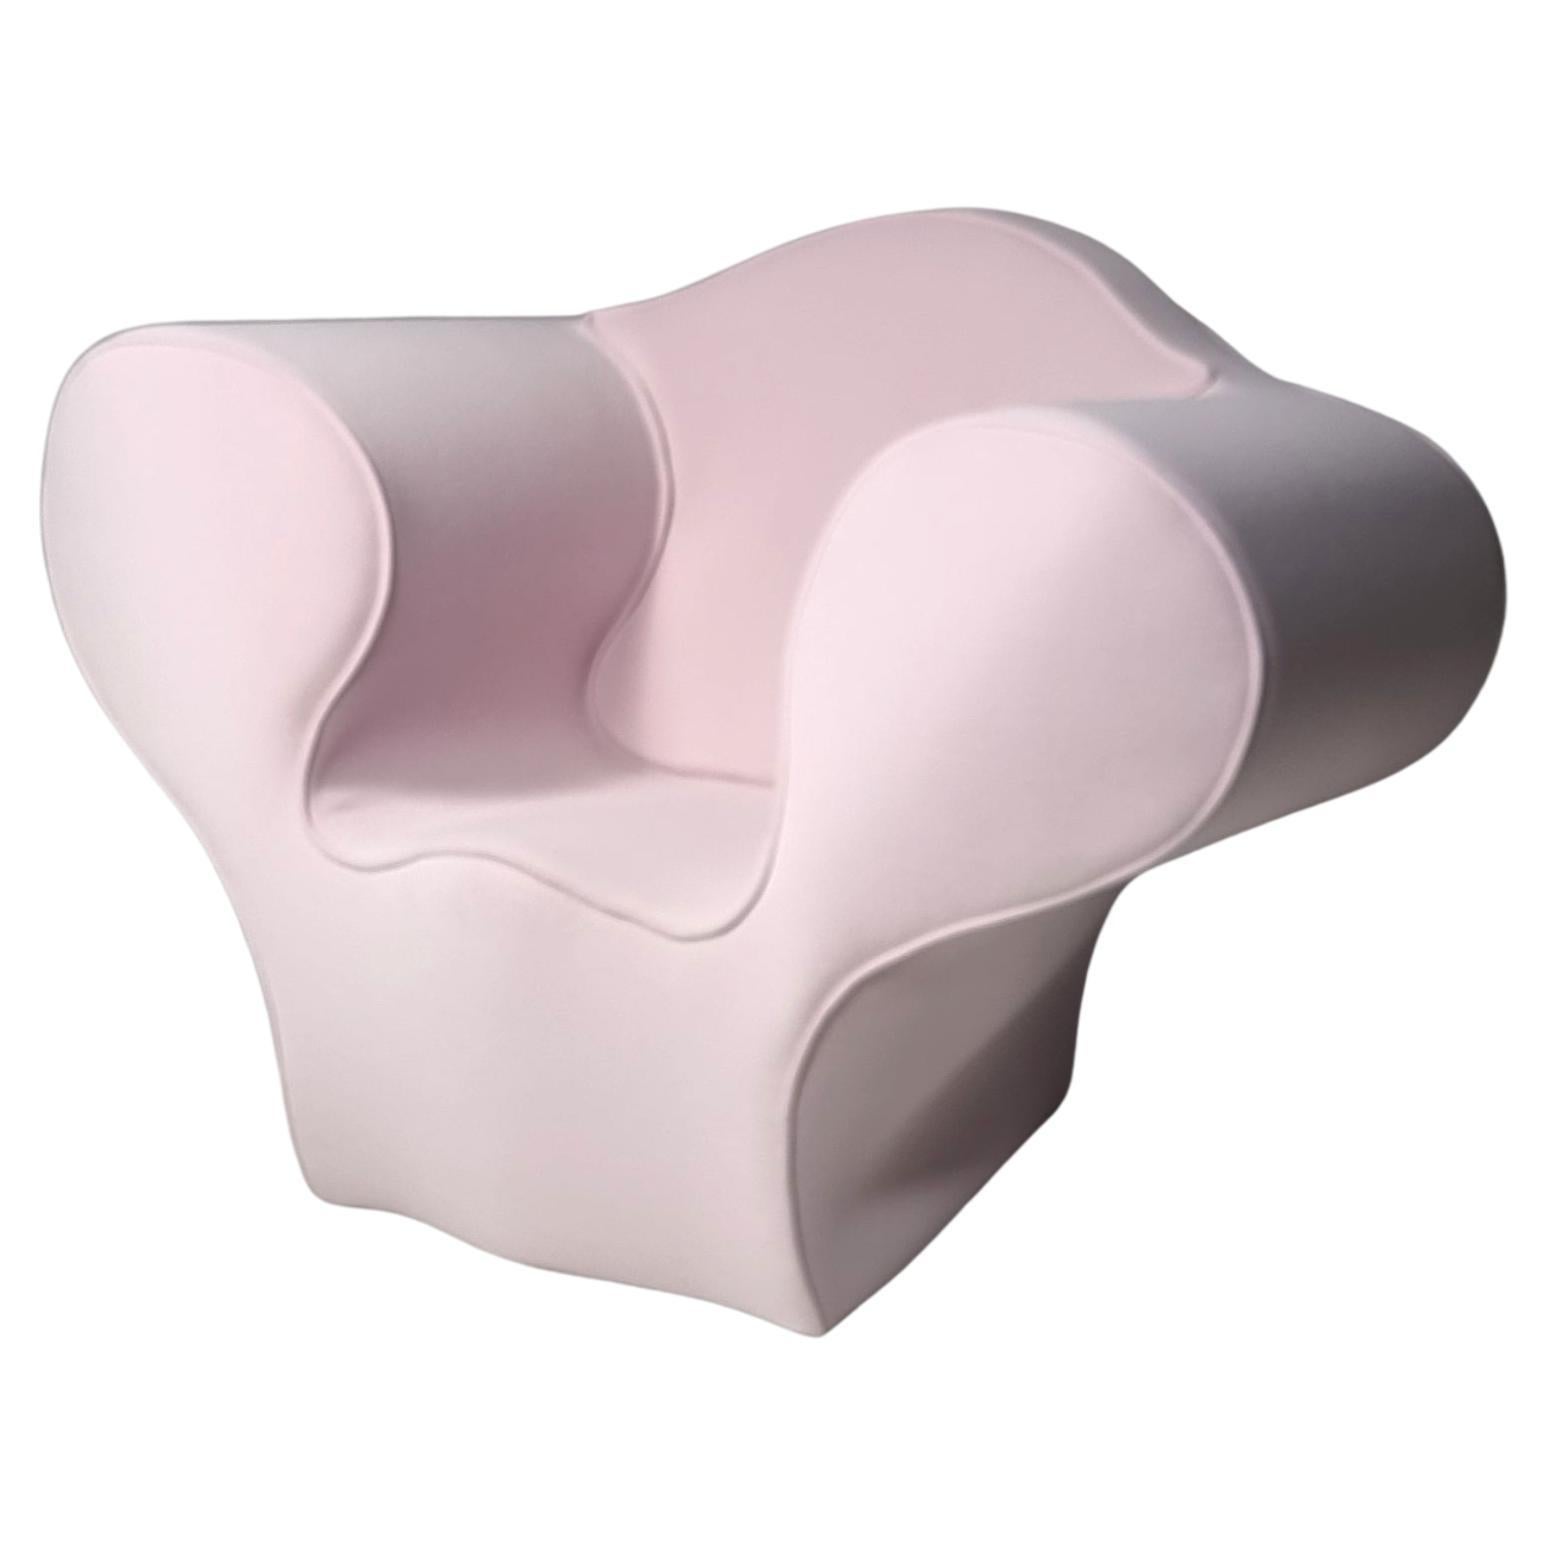 Soft Pink Big Easy Lounge Chair by Ron Arad for Moroso